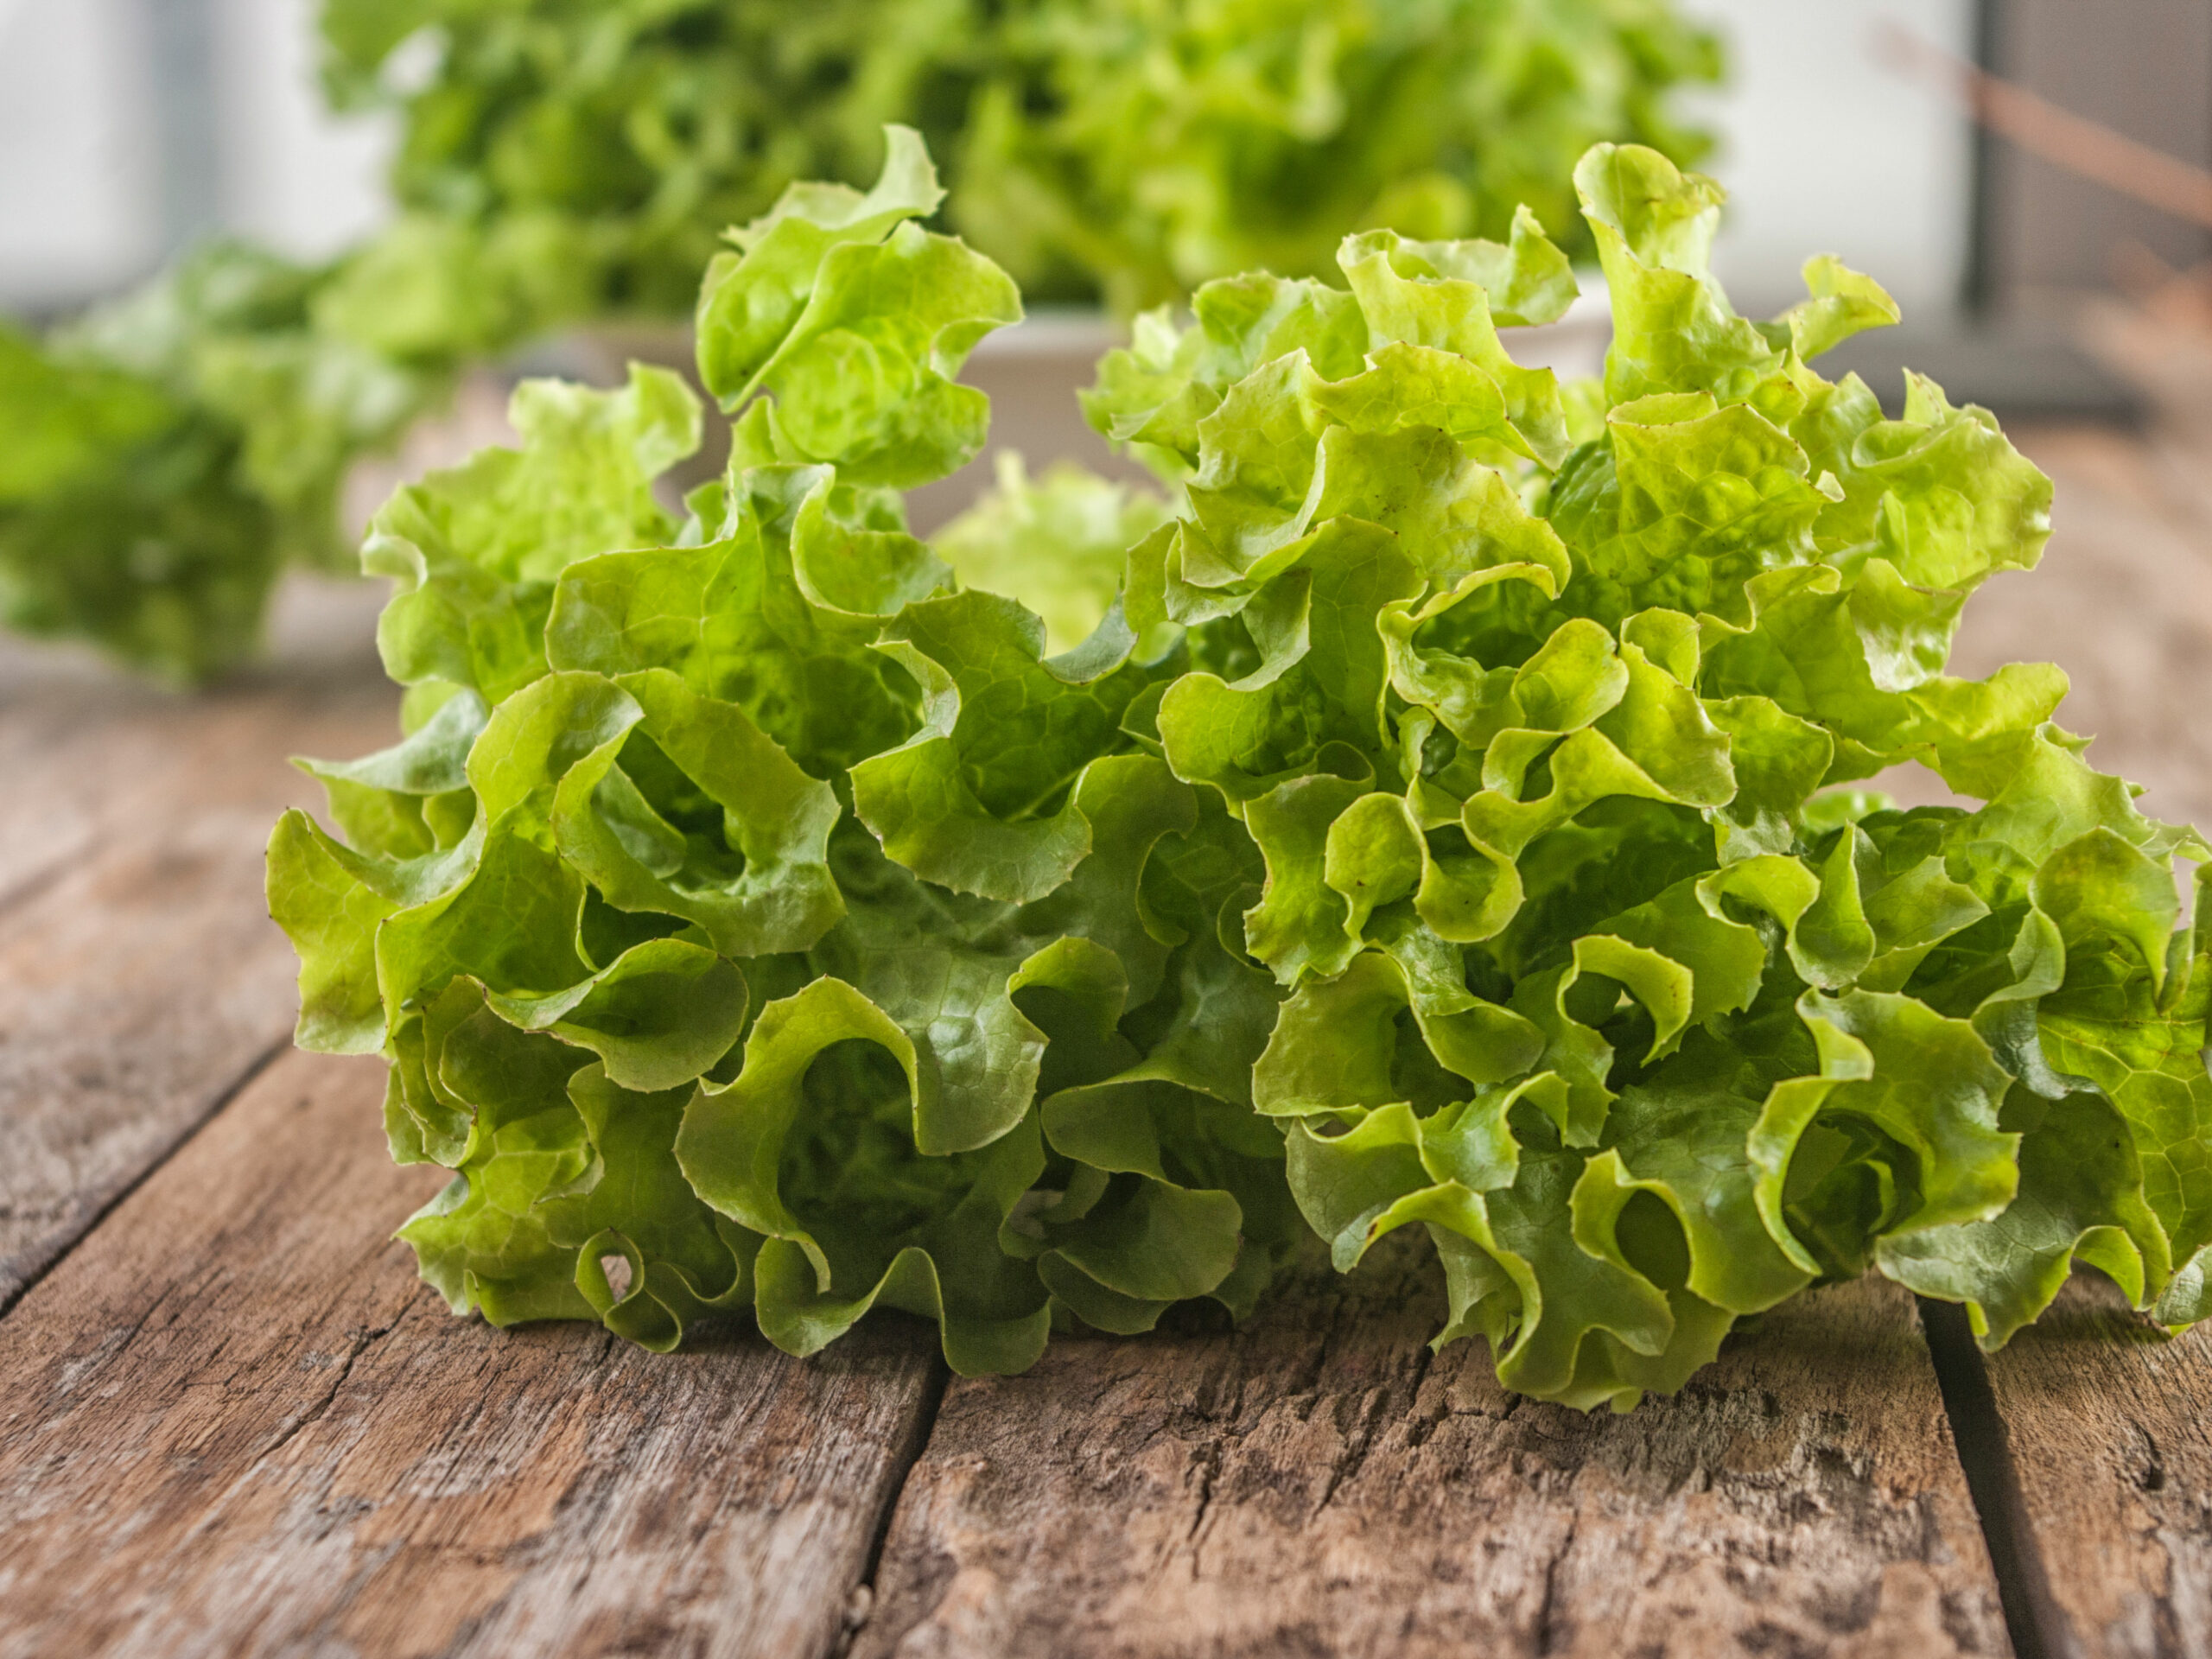 New tech could soon let you test whether your lettuce carries E. coli